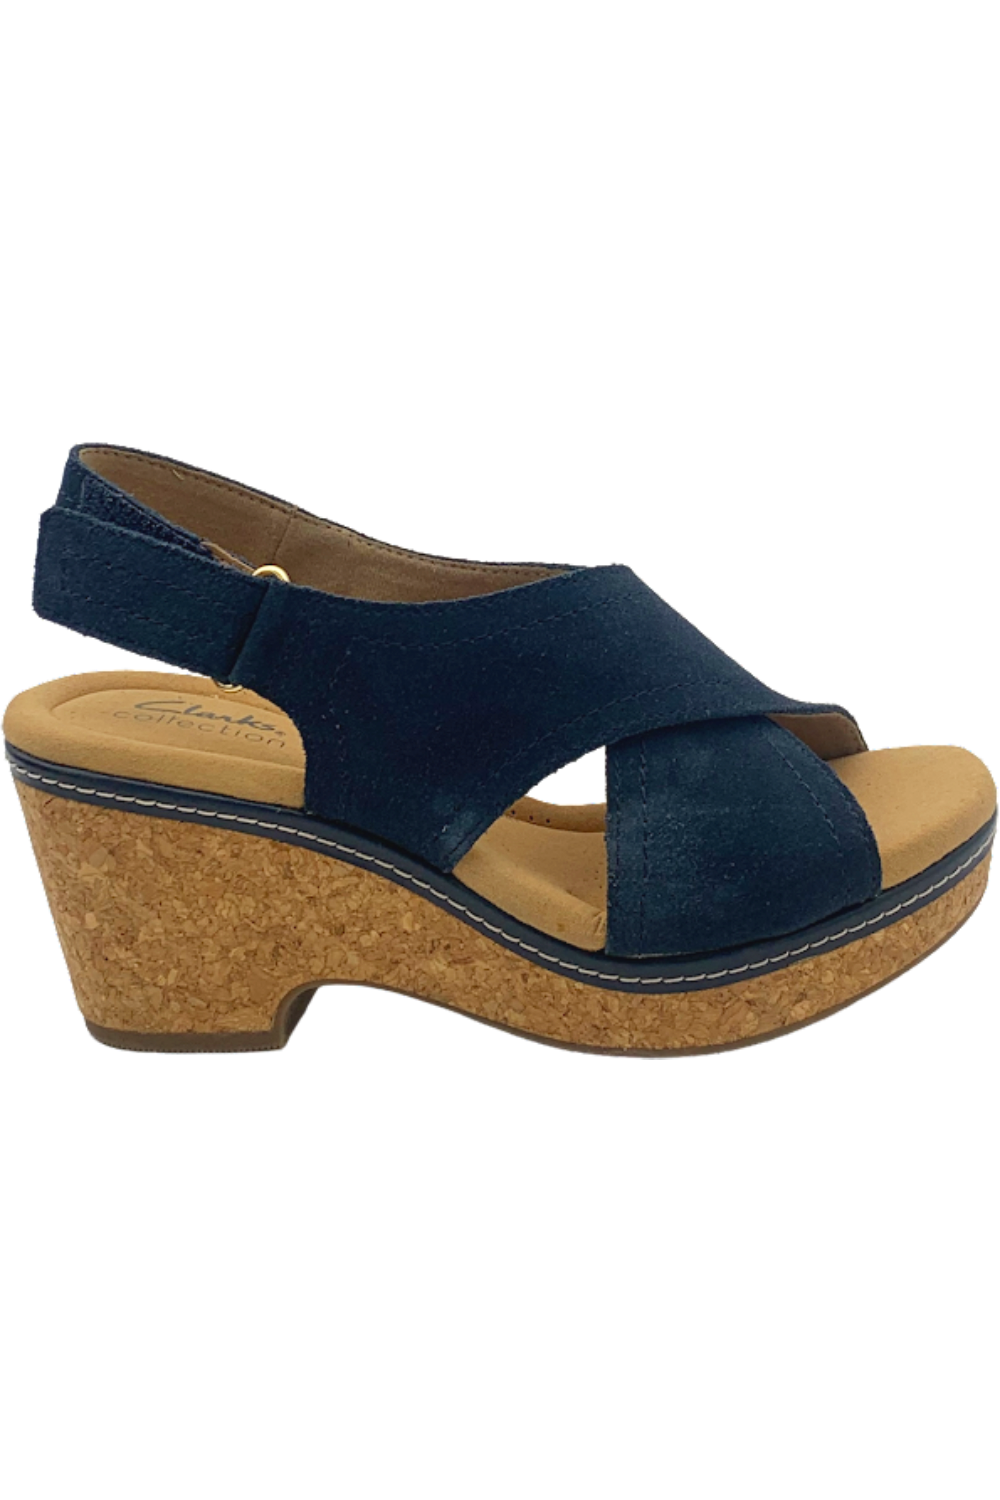 Clarks Collection Suede Wedge Sandals Giselle Cove Navy | Jender